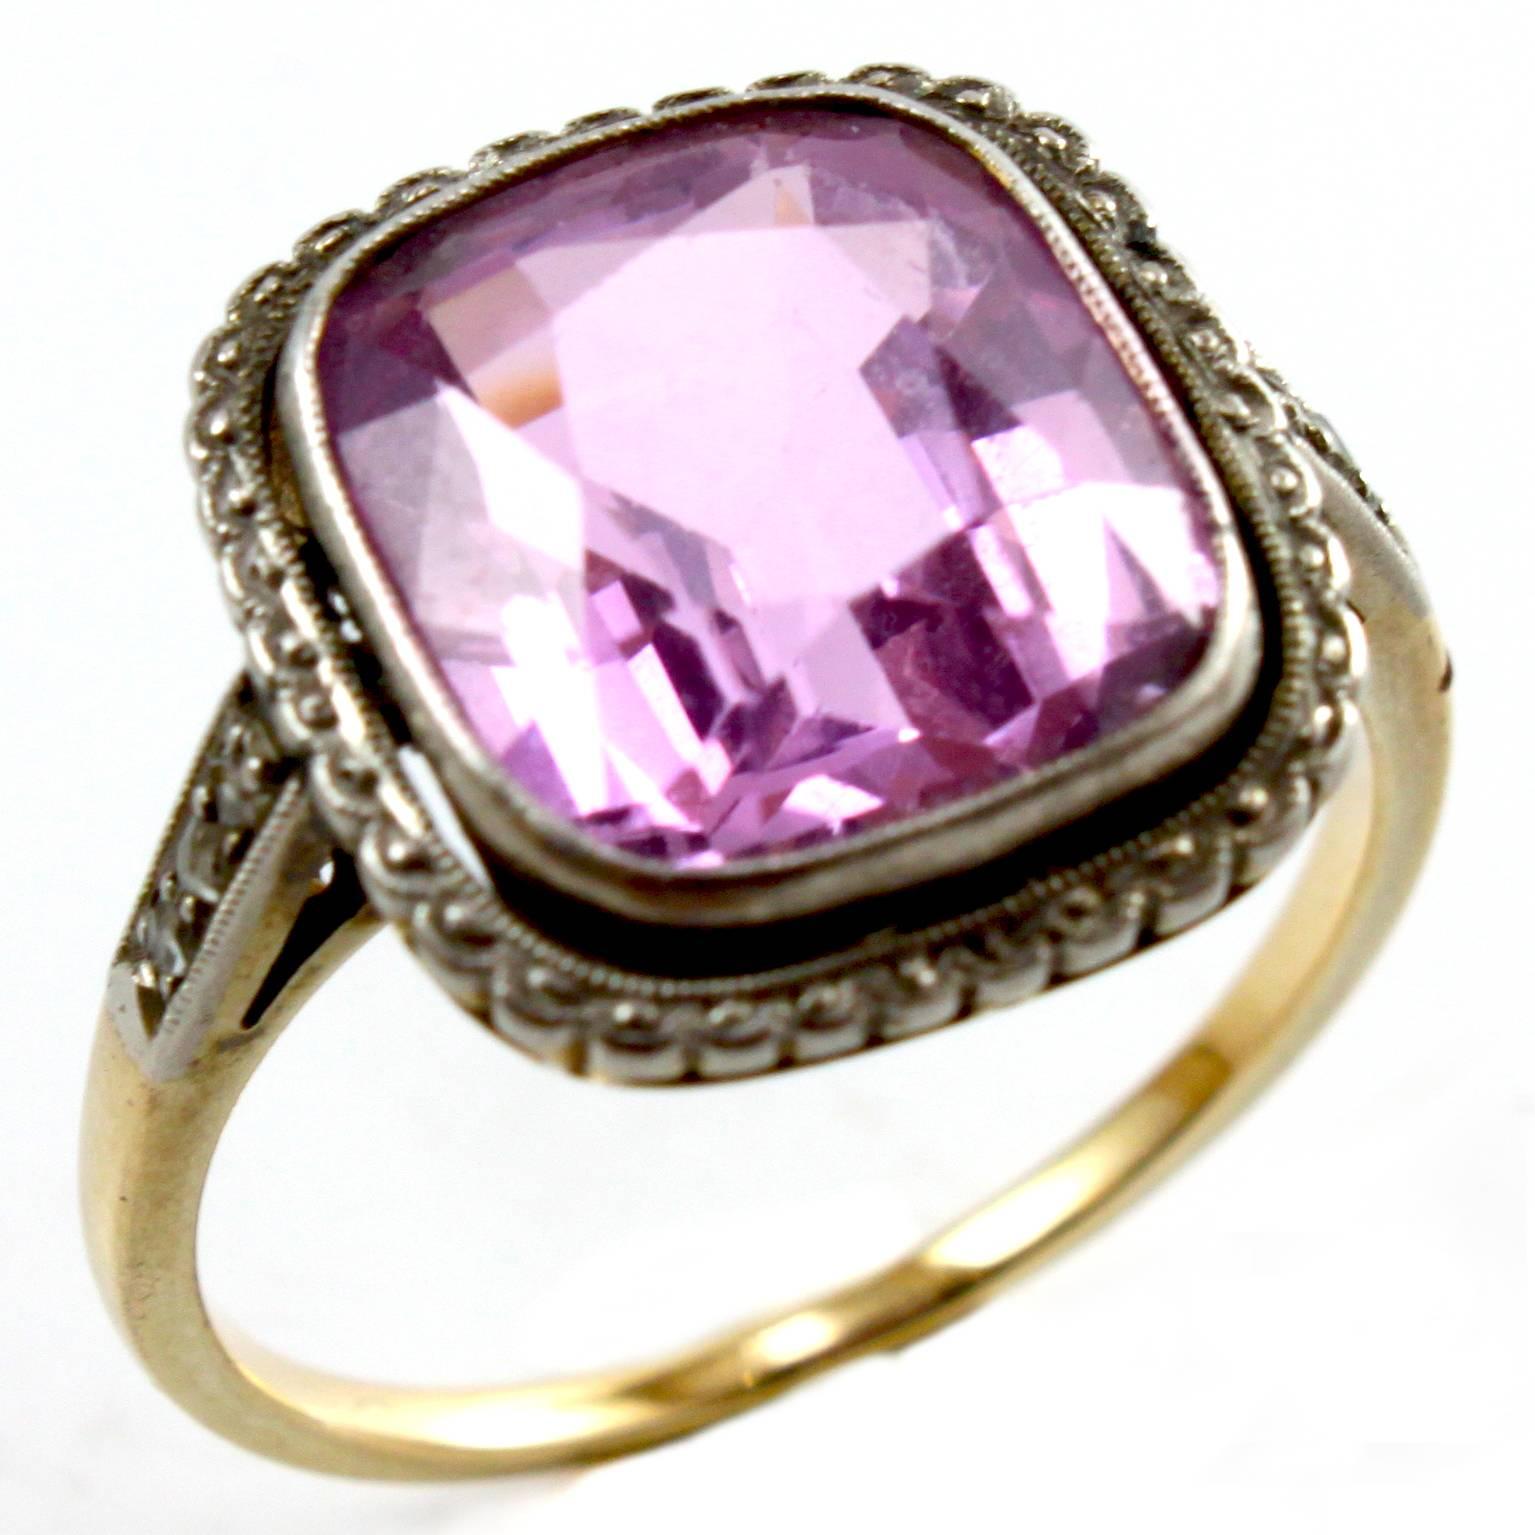 A graceful Edwardian ring with a central old mine Pink Topaz cushion, weighing circa 6 carats, and flanked by small rosecut diamonds - the Pink Topaz has a very lovely hue. 